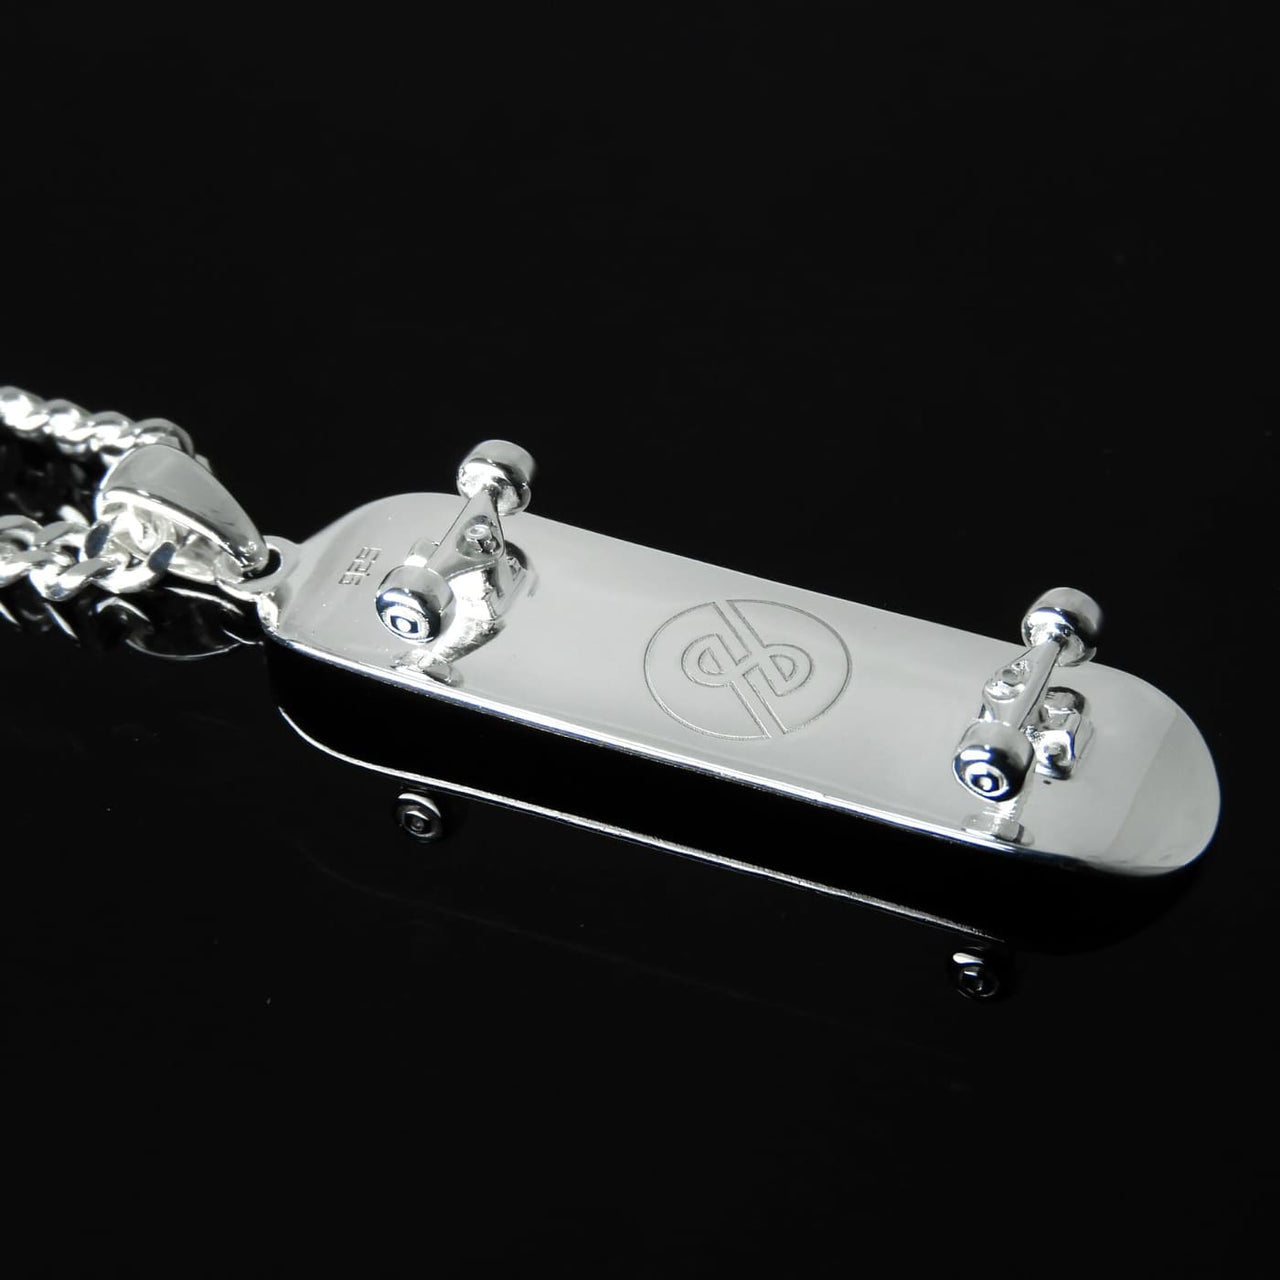 Skateboard And Strap - Luxury S00 Silver